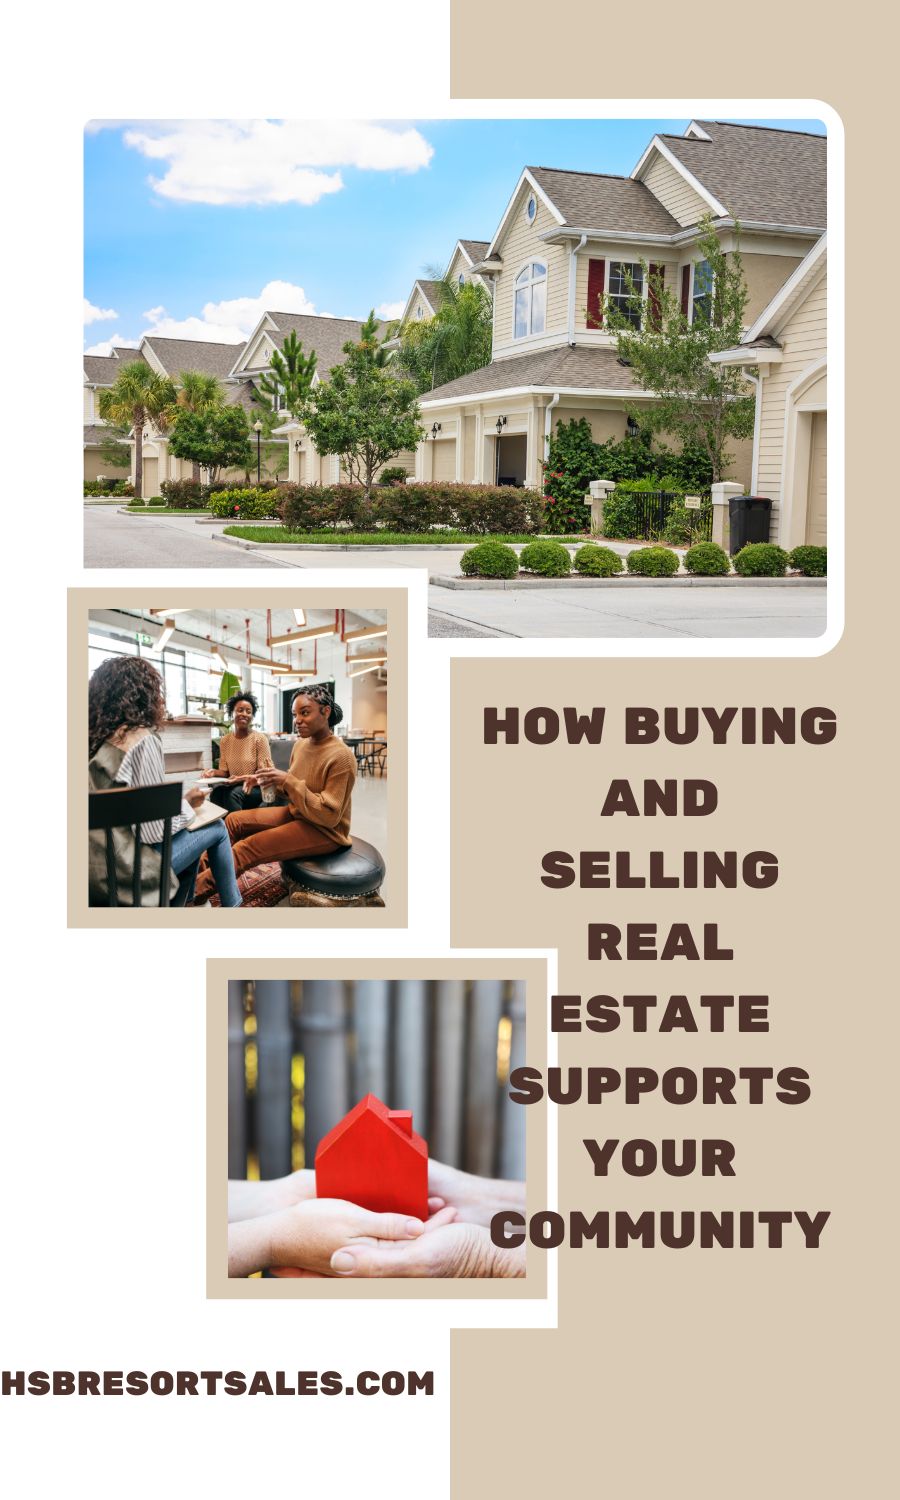 How Buying and Selling Real Estate Supports Your Community